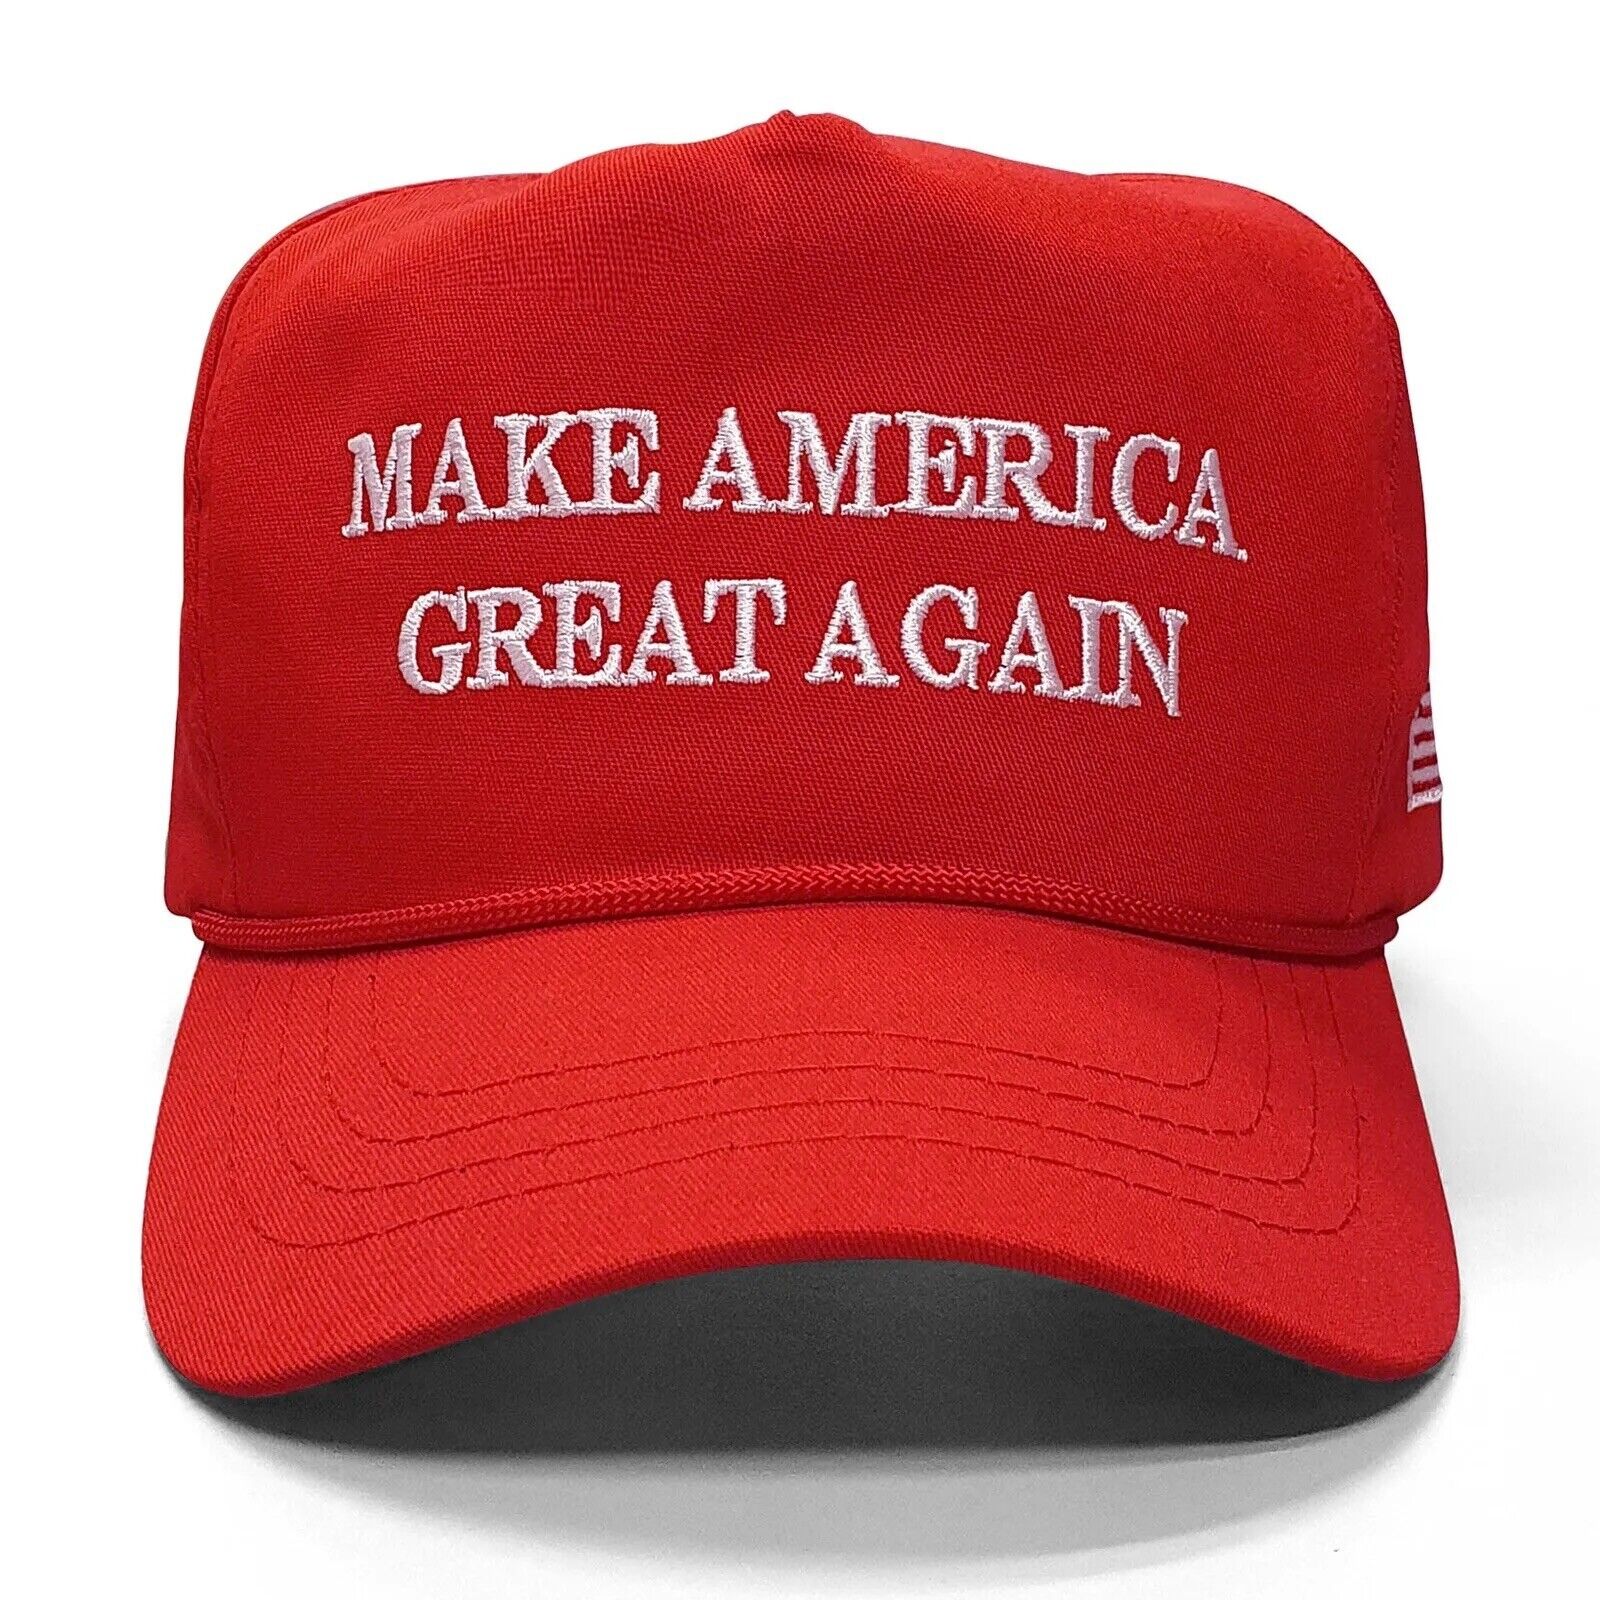 Make America Great Again - Donald Trump 2016 Embroidered Campaign Hat